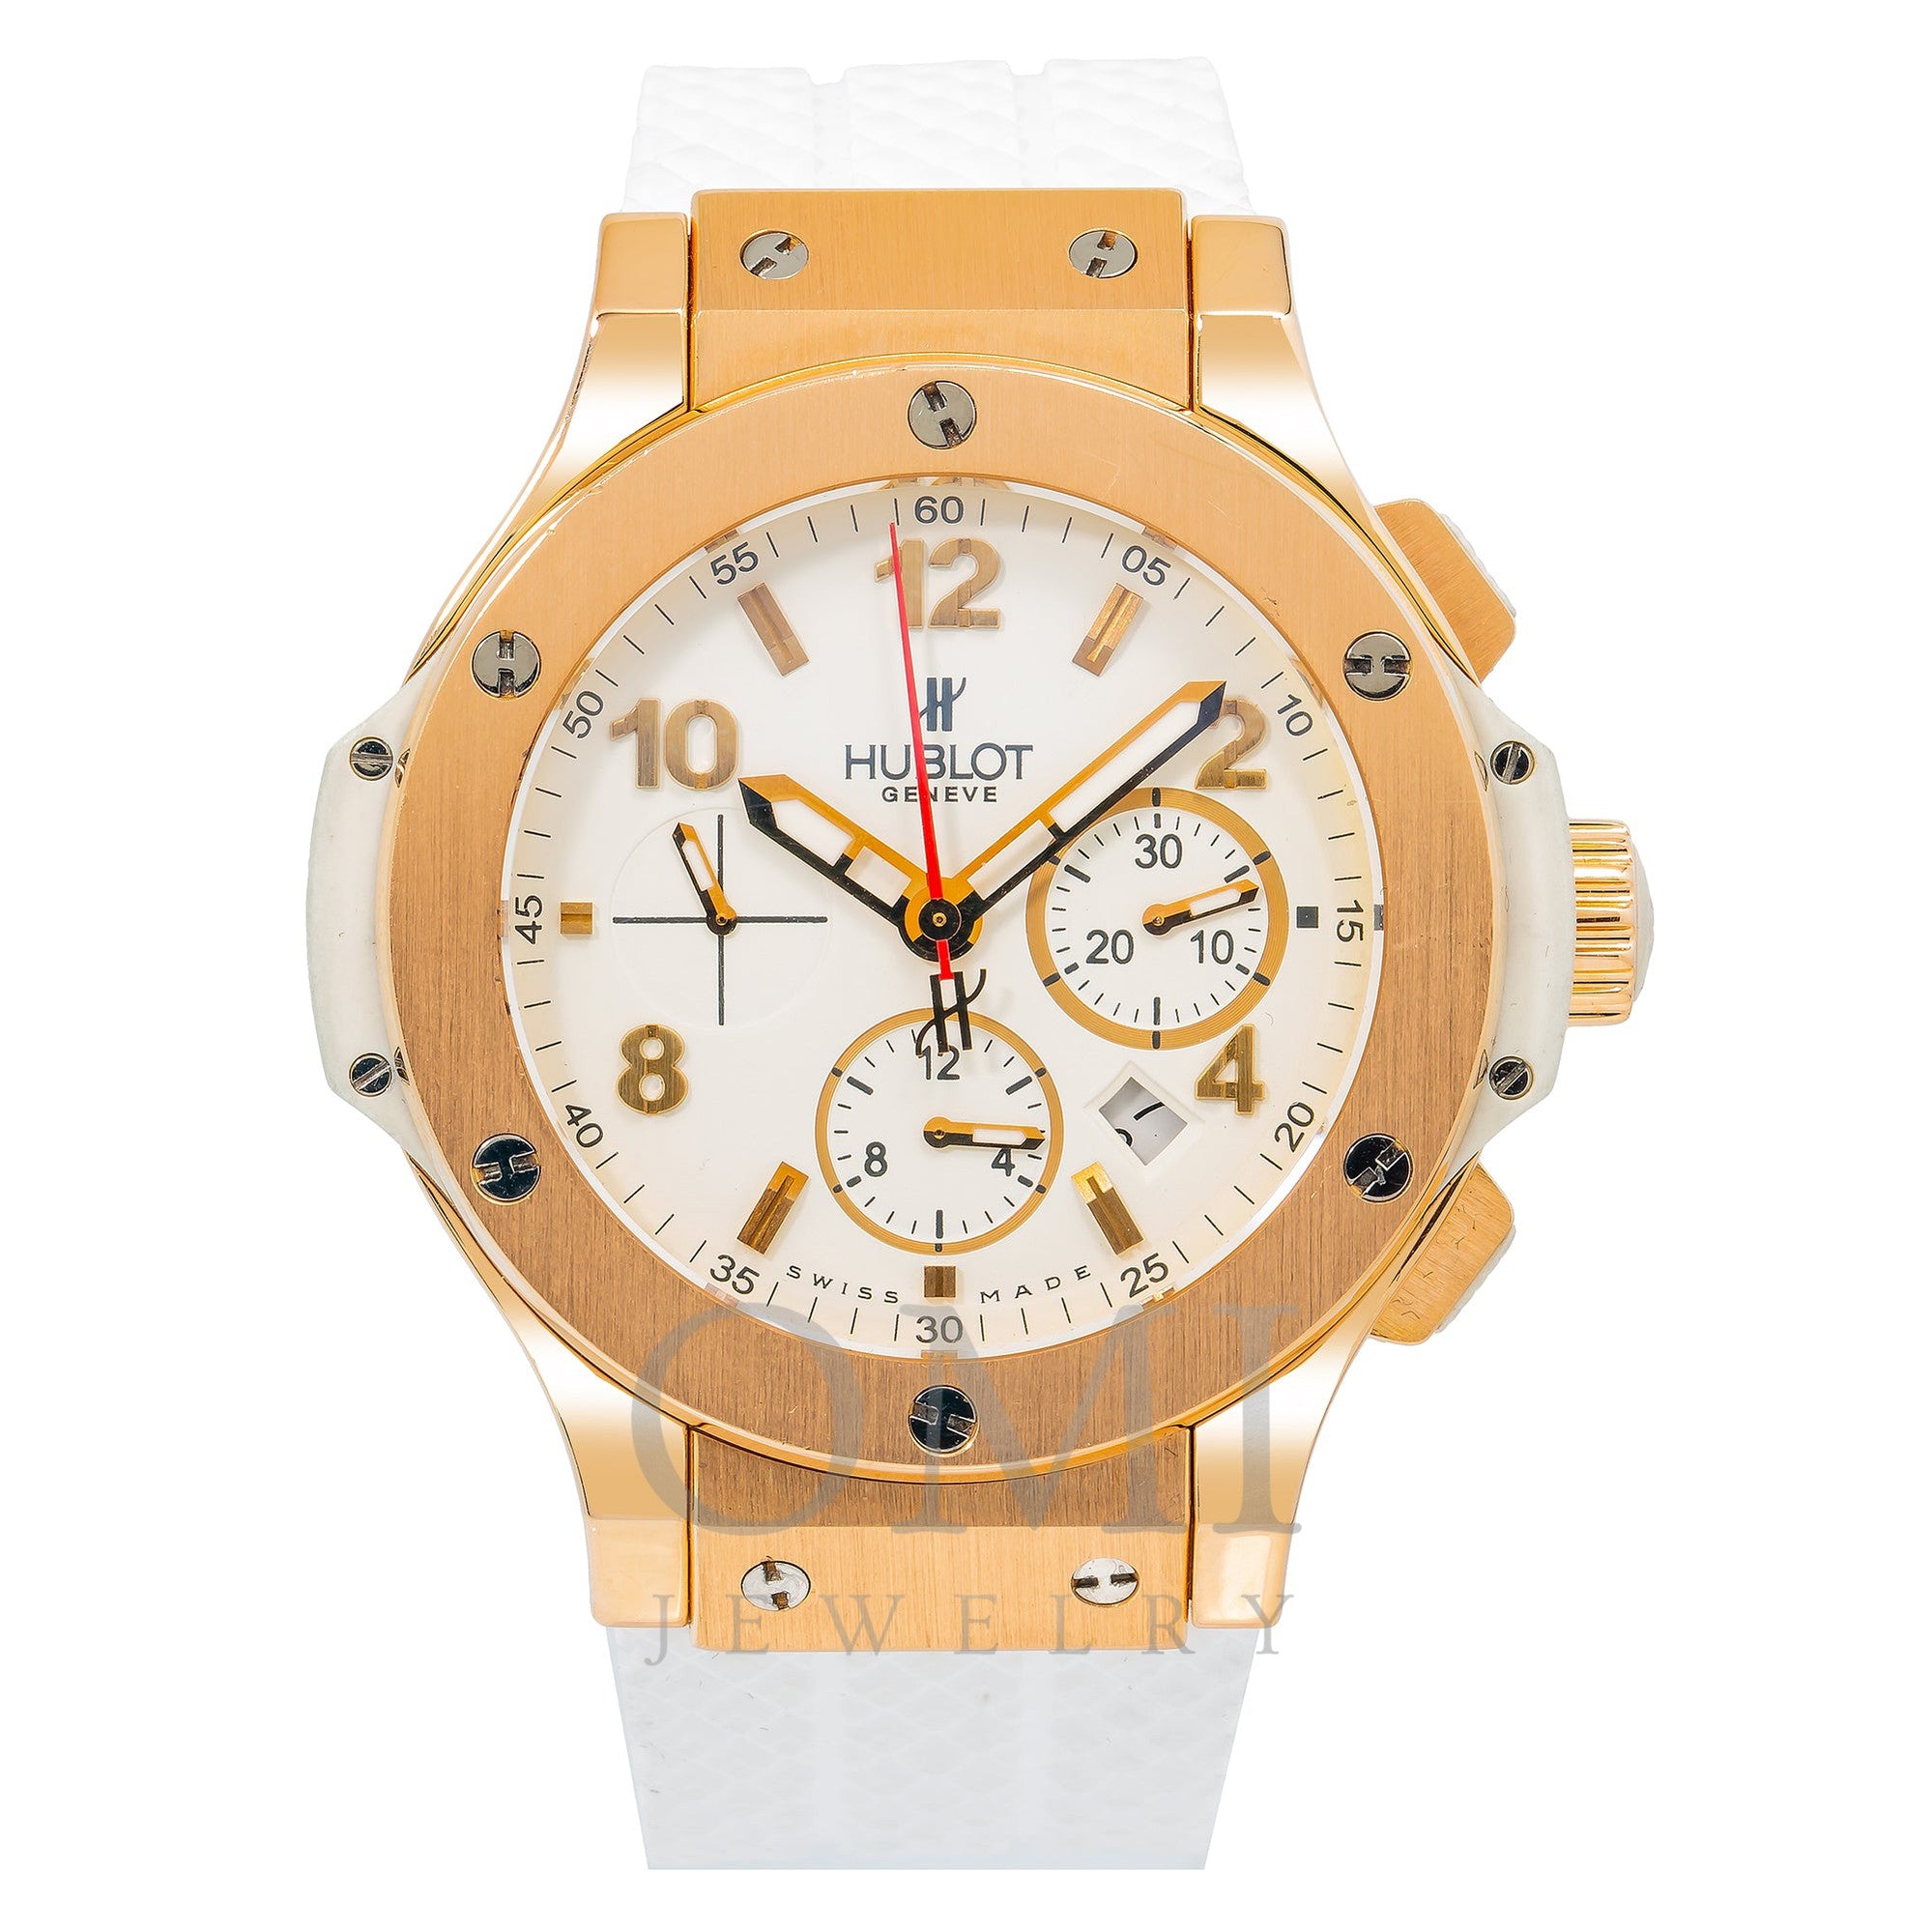 Hublot Big Bang Rose Gold Watches - Page 3 of 3 - Luxury Watches USA